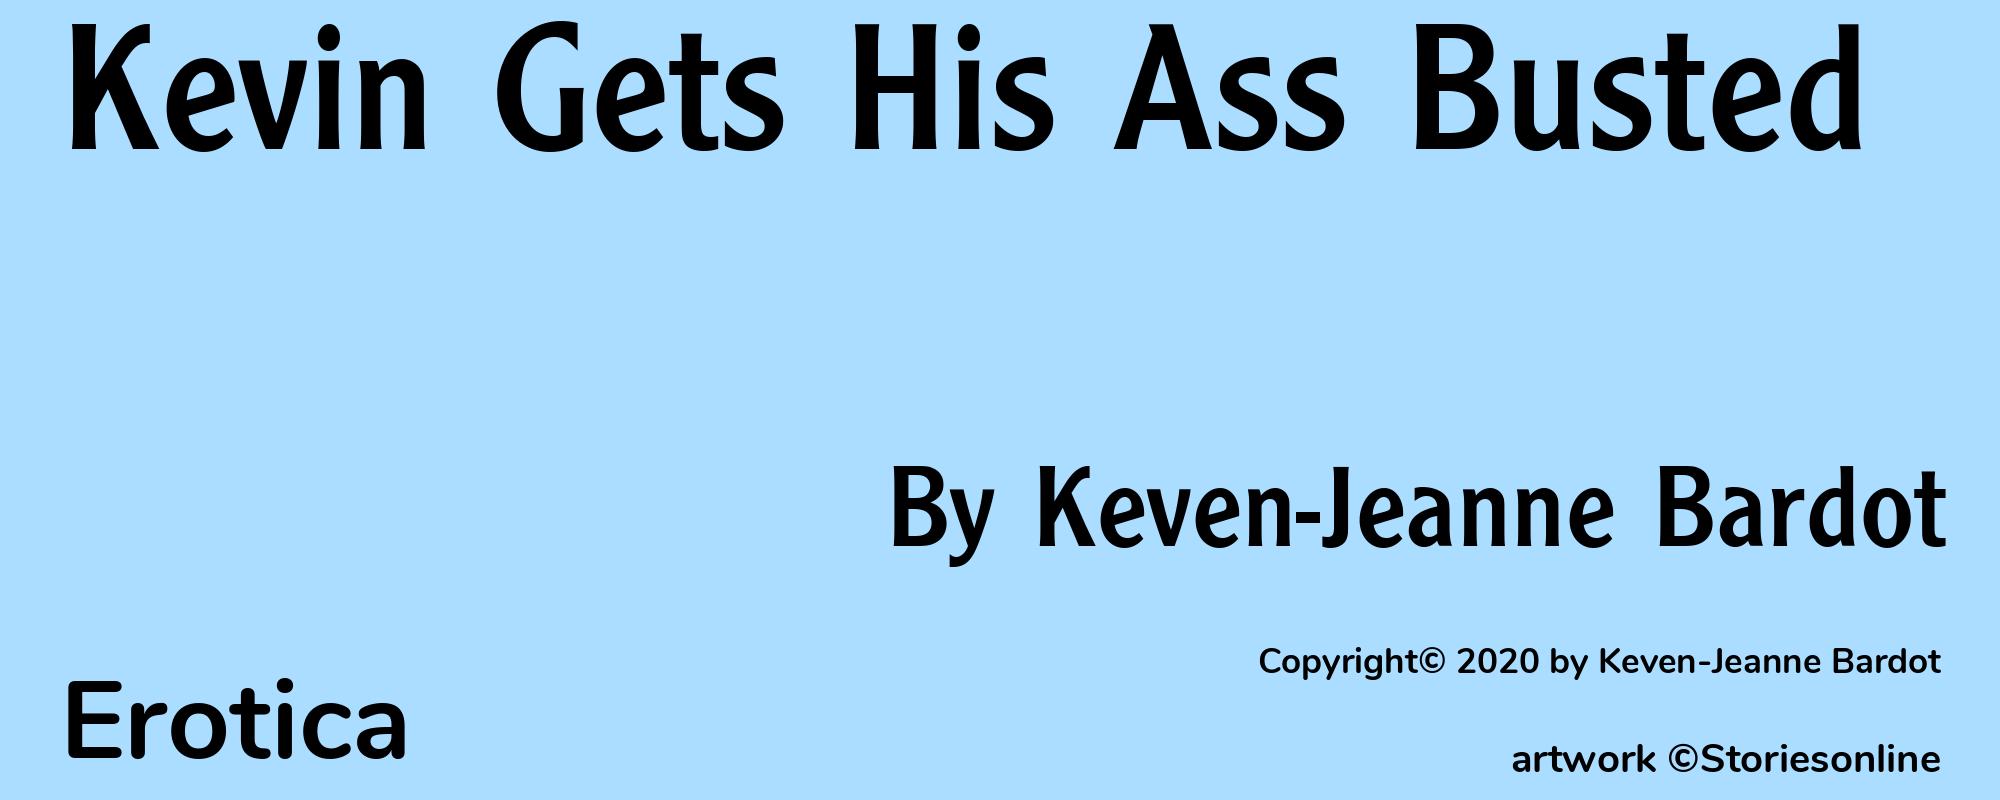 Kevin Gets His Ass Busted - Cover